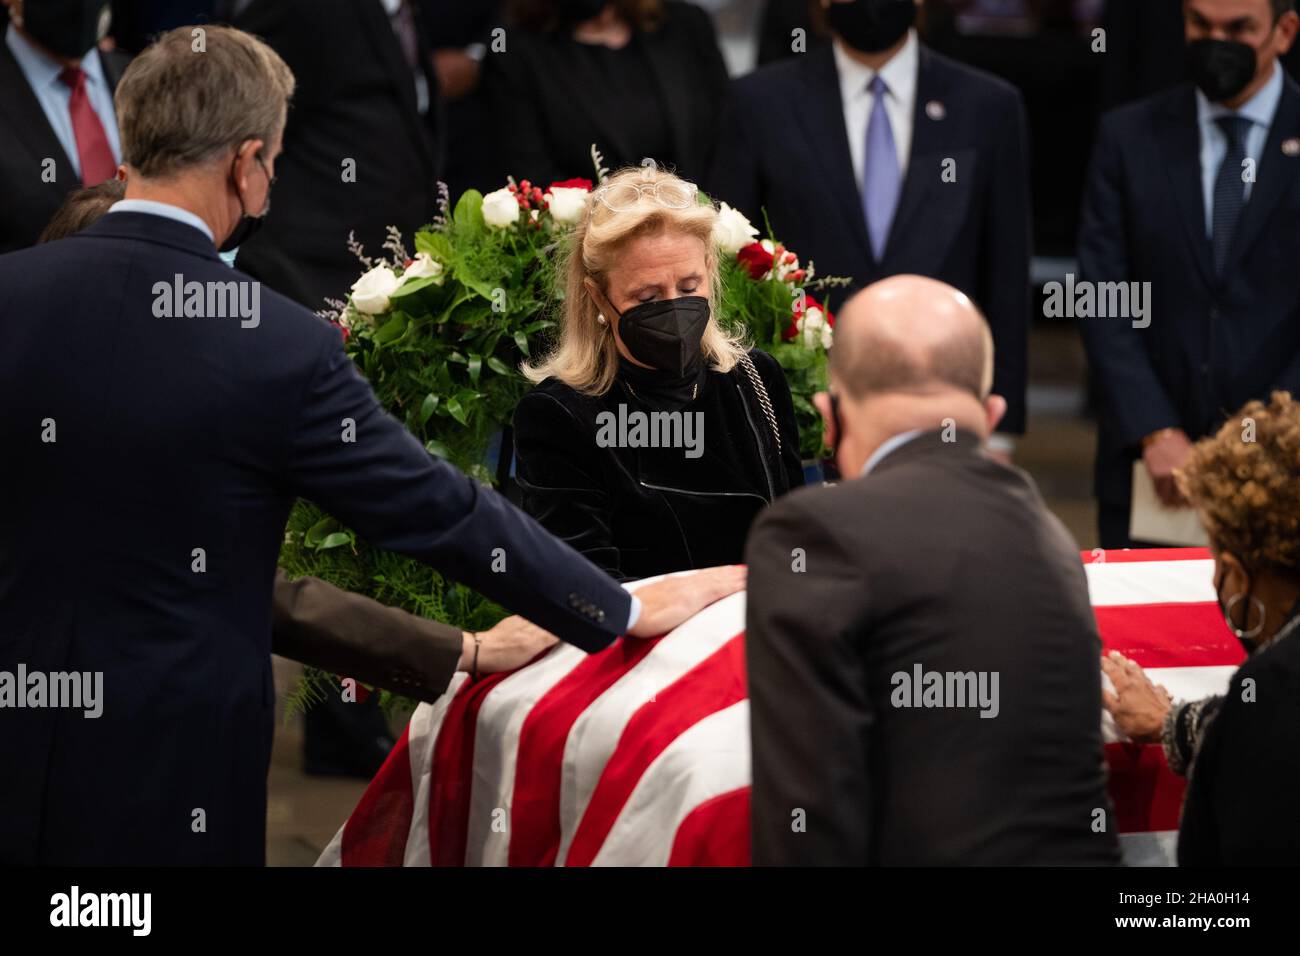 United States Representative Debbie Dingell (Democrat of Michigan), center, flanked by fellow representatives, pays respect to former Senator Robert J. Dole (R-KS) as he lies in state at the Rotunda of the U.S. Capitol in Washington, DC on Thursday, December 9, 2021. Credit: Sarahbeth Maney/Pool via CNP /MediaPunch Stock Photo